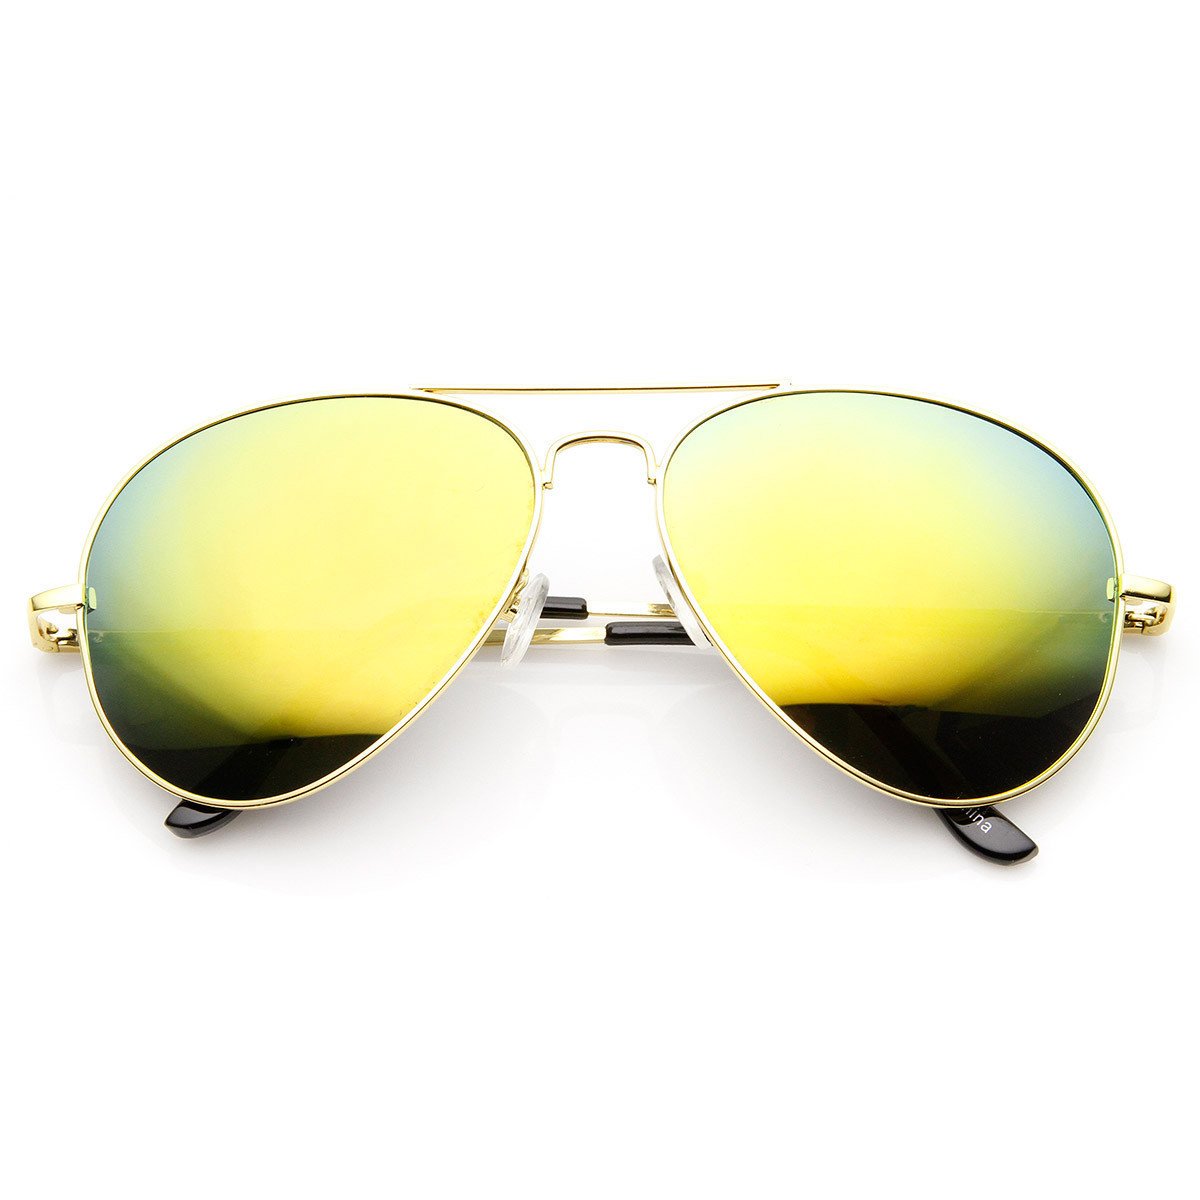 Classic Metal Teardrop Color Mirror Lens Aviator Sunglasses W/ Spring Hinges - 1486 - Gold Mixed (3-Pack) + Deluxe Case